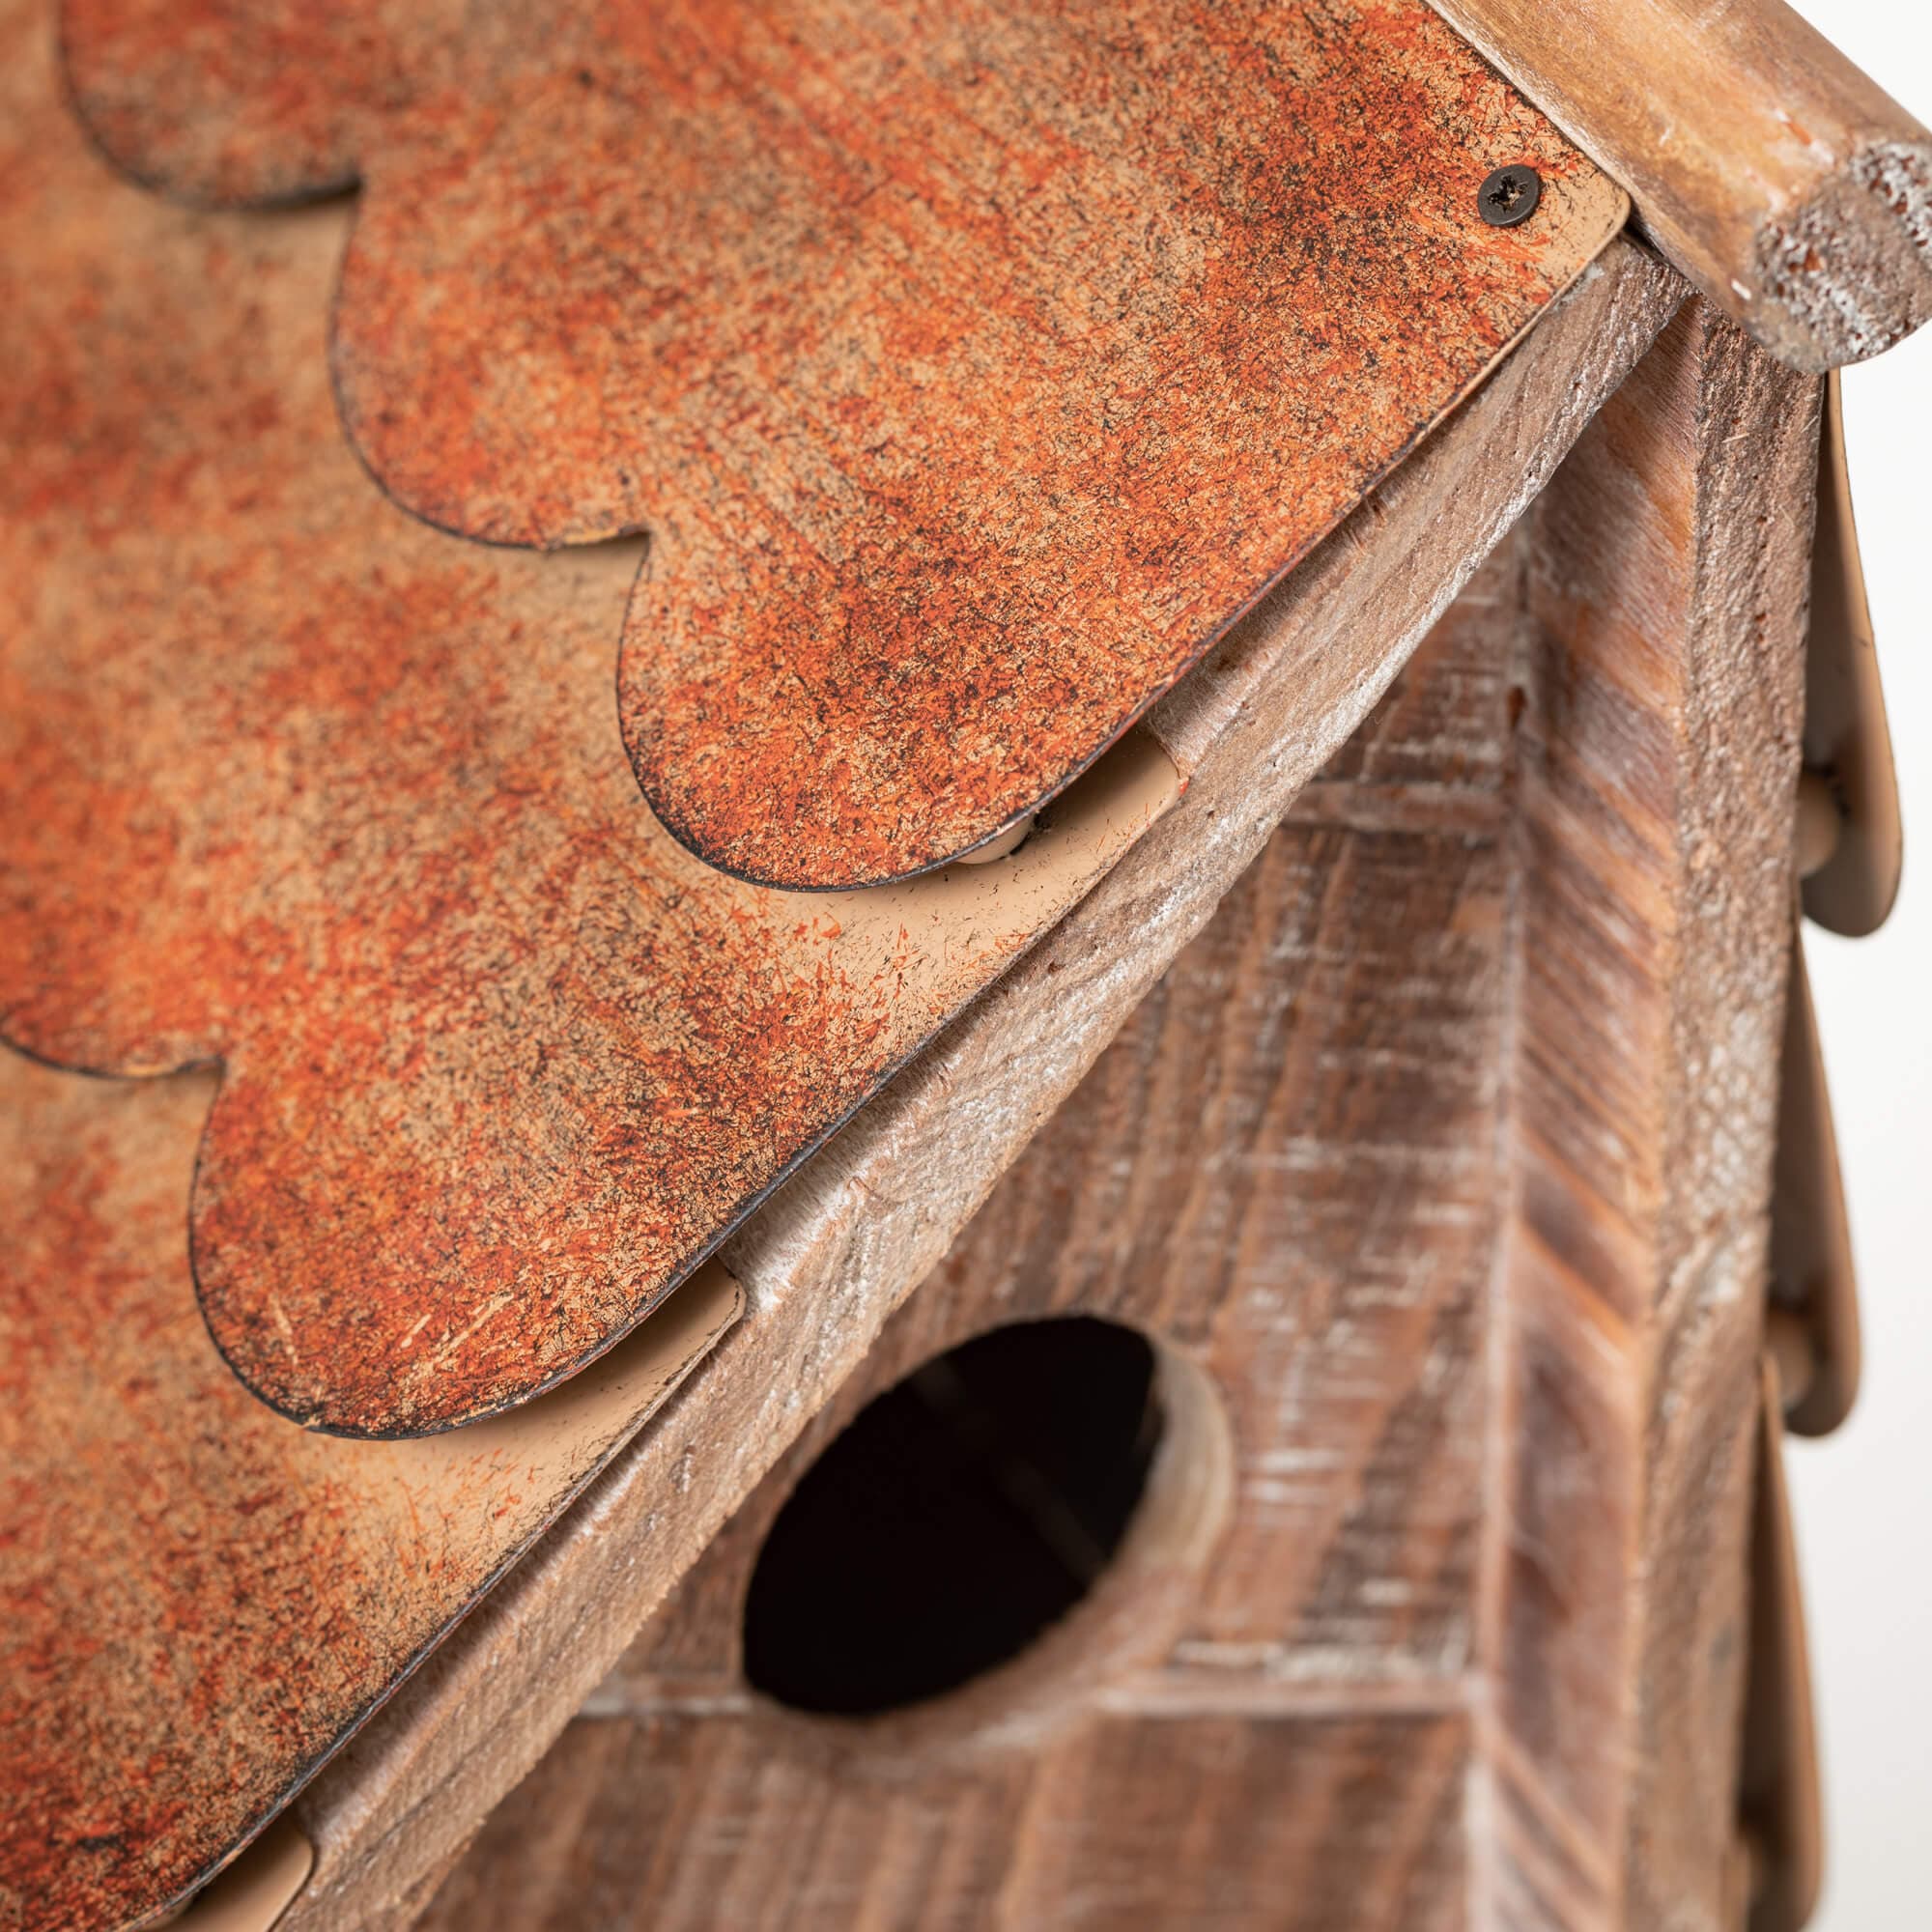 Birdhouse With Copper Roof Elevate Home Decor - Outdoors